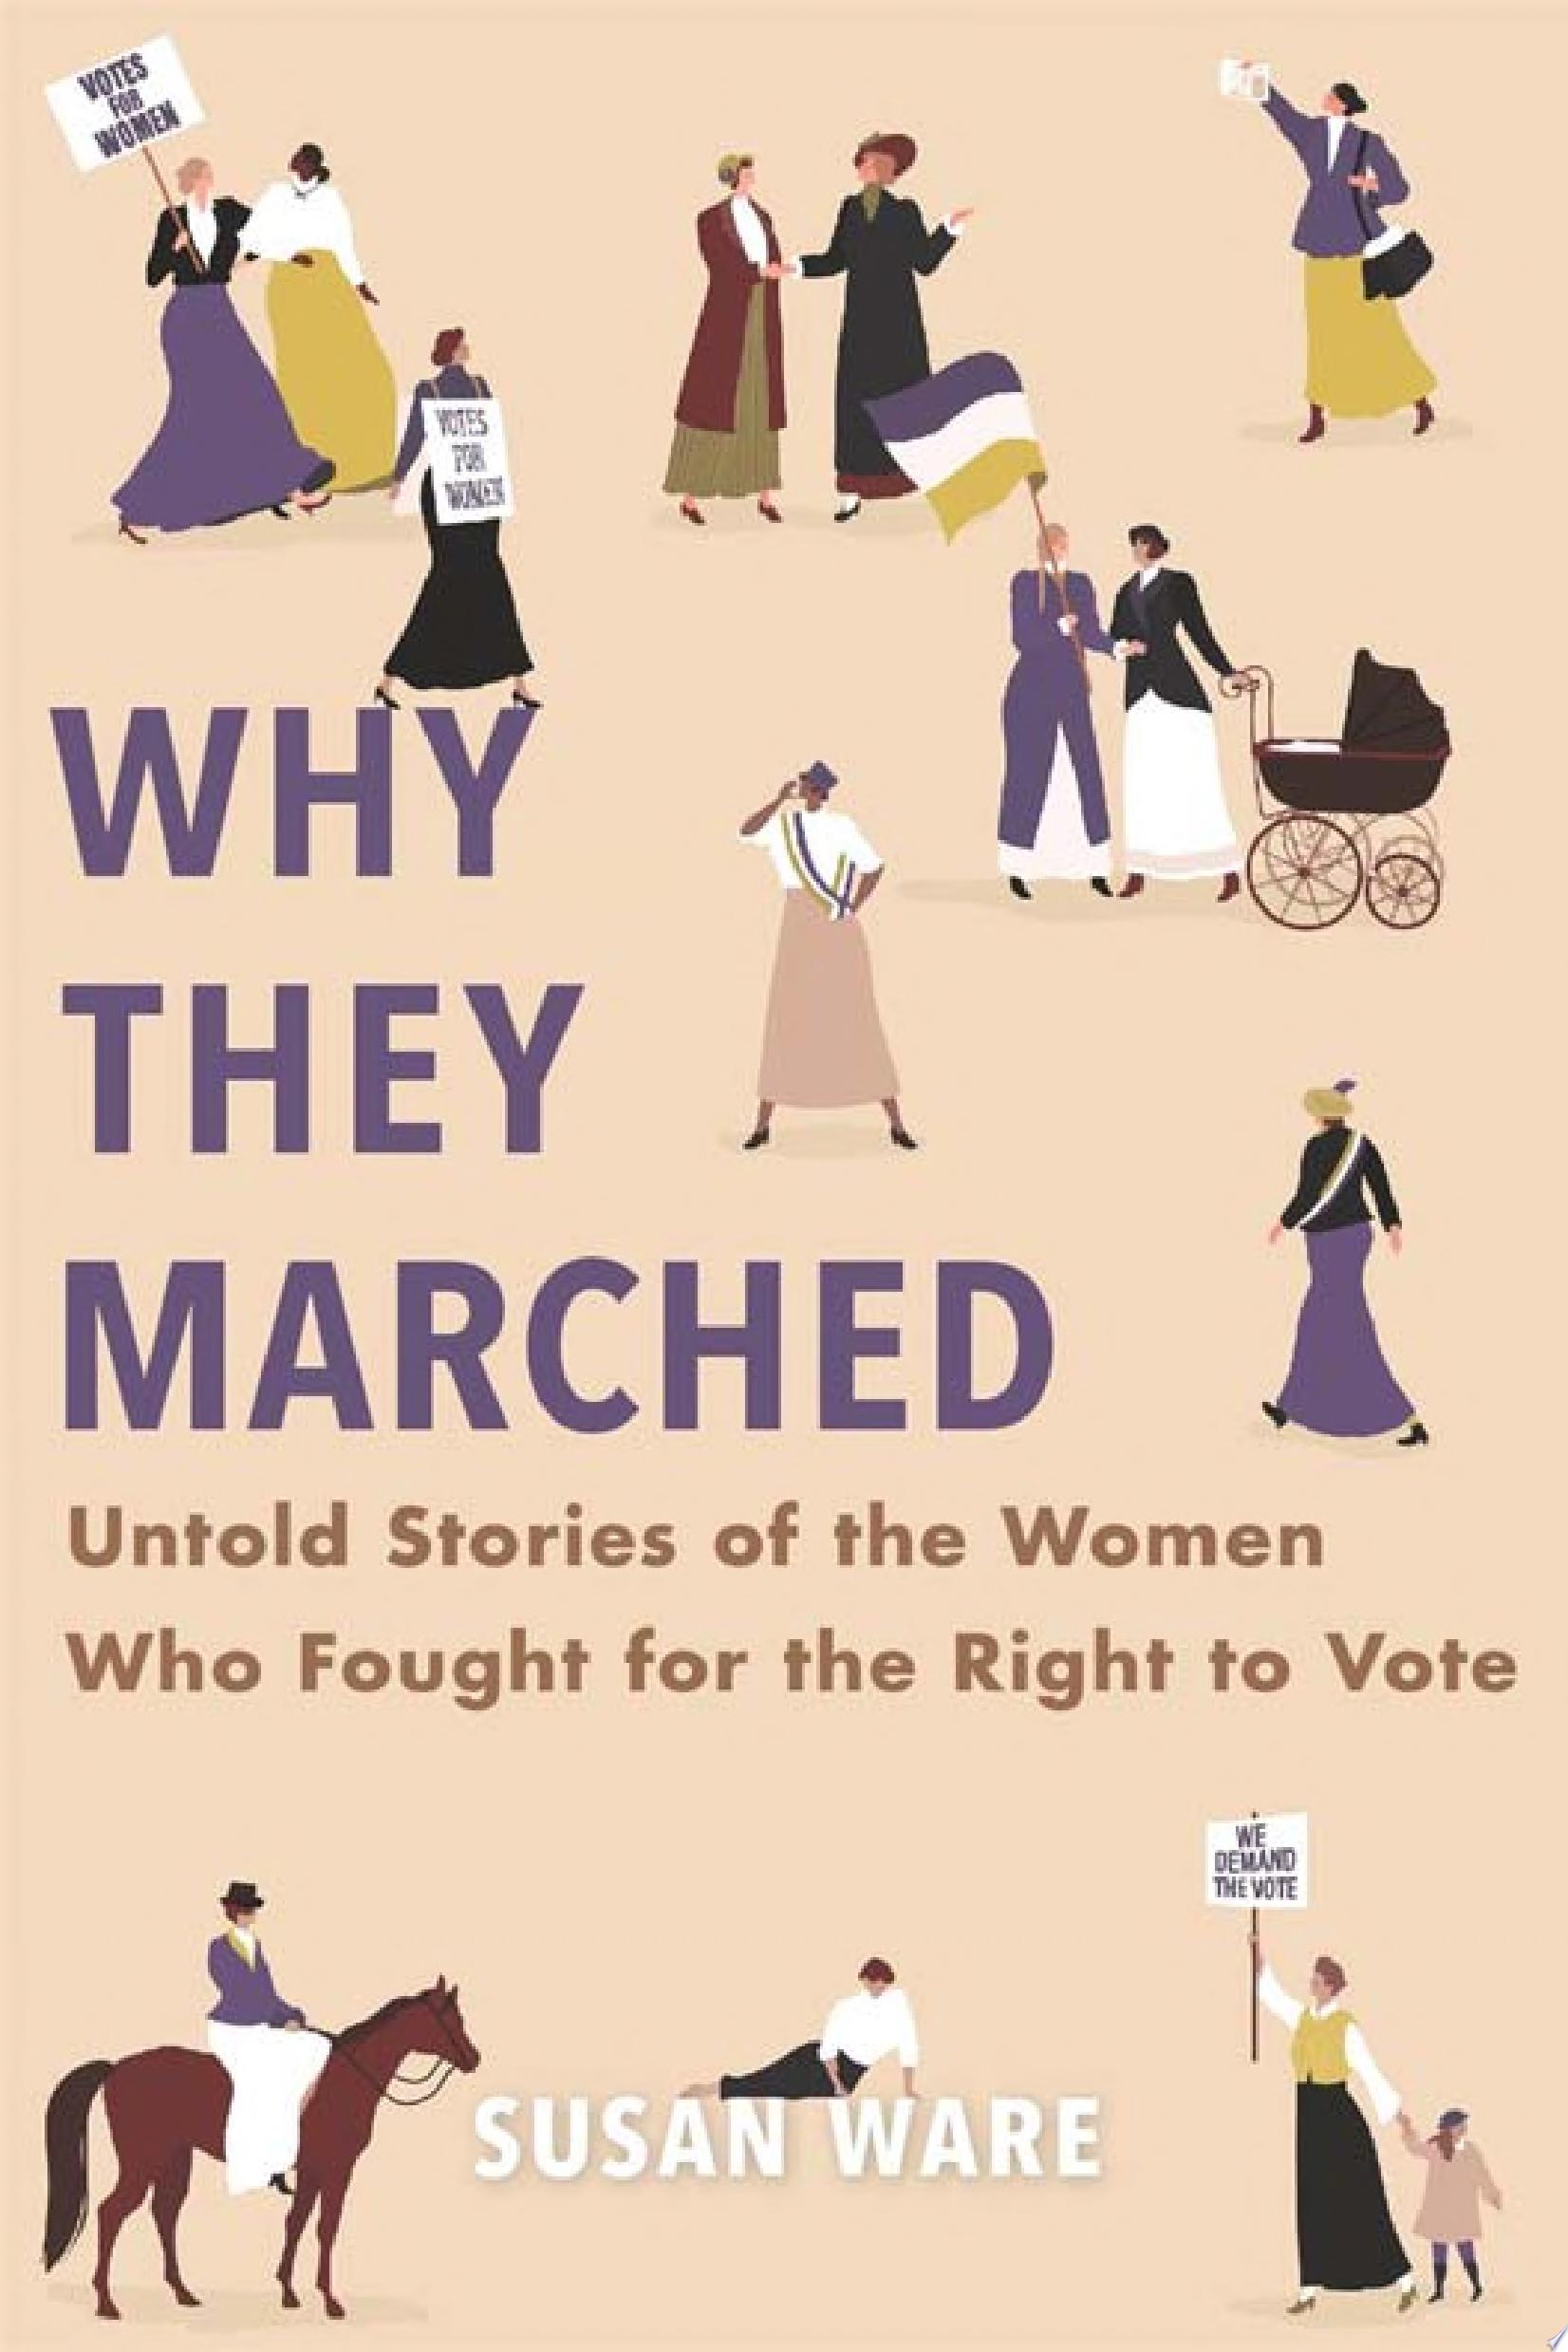 Image for "Why They Marched"